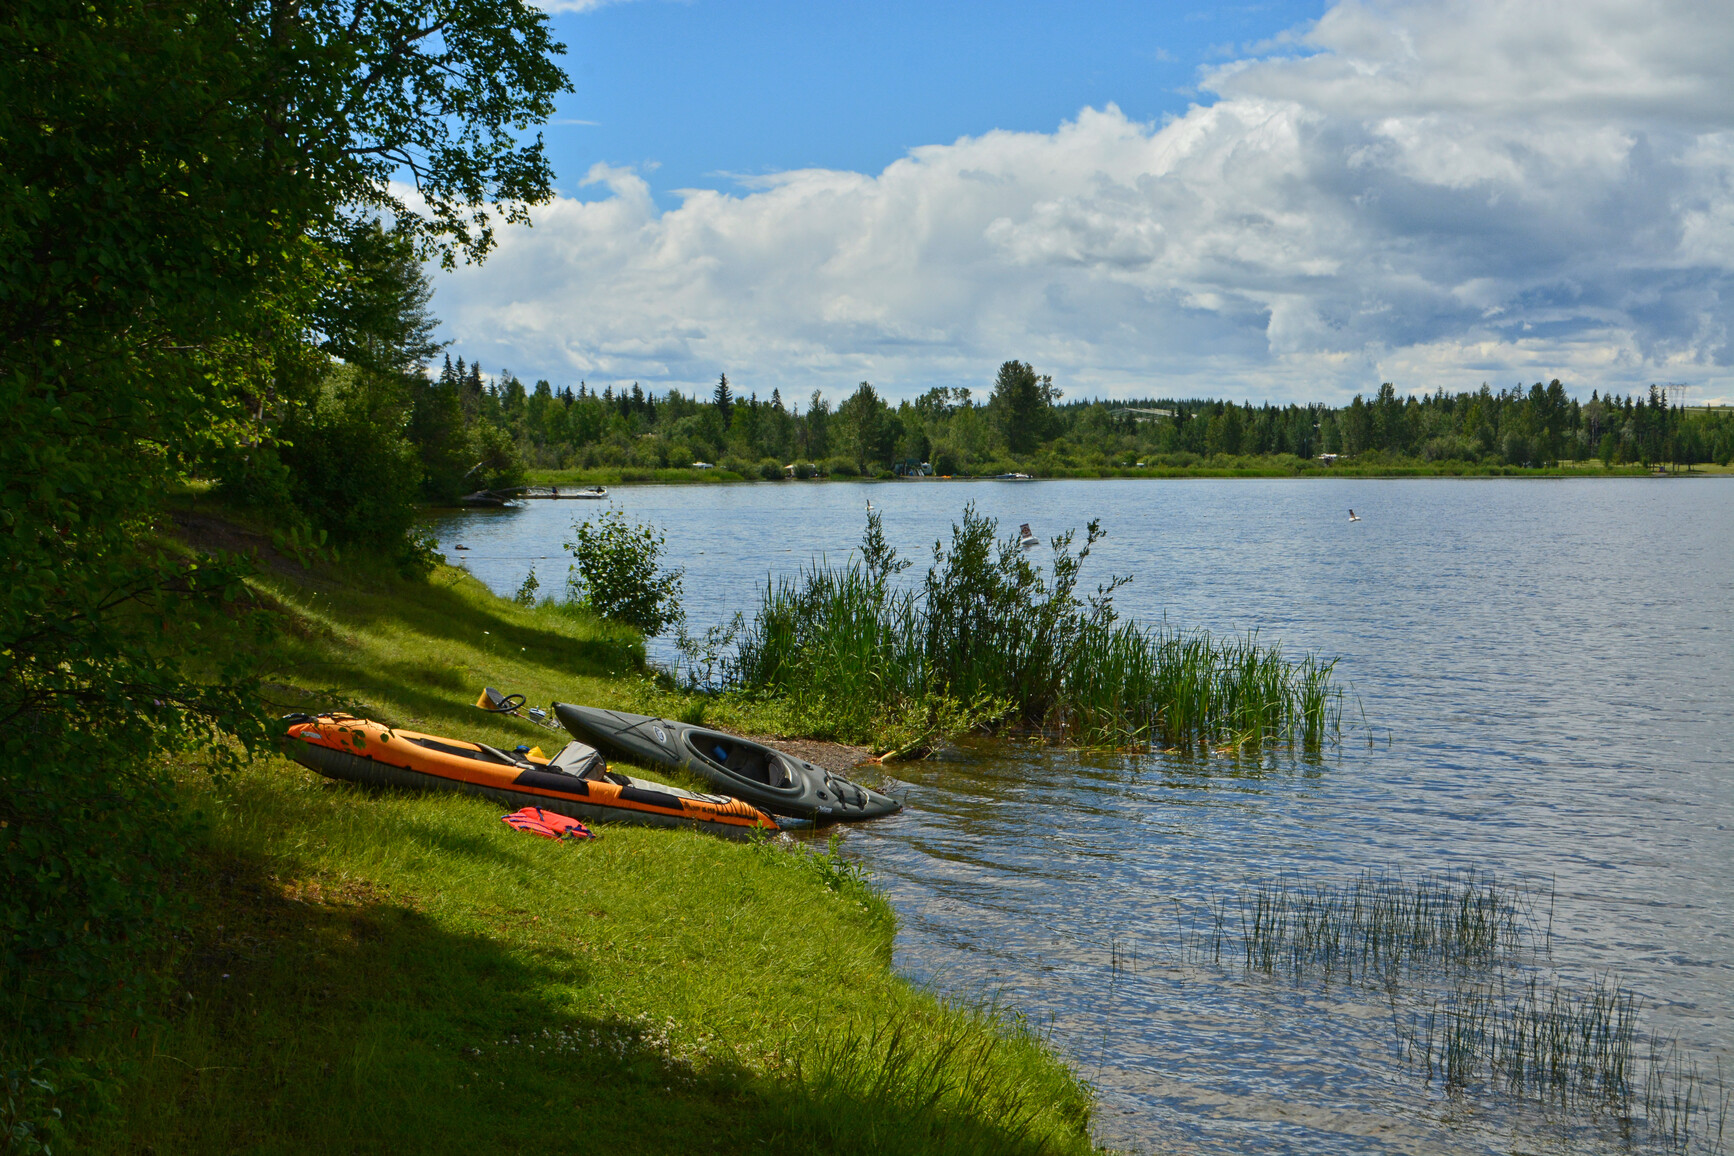 Kayaks on the shore of Ten Mile Lake. In the background is the dock and a boat.